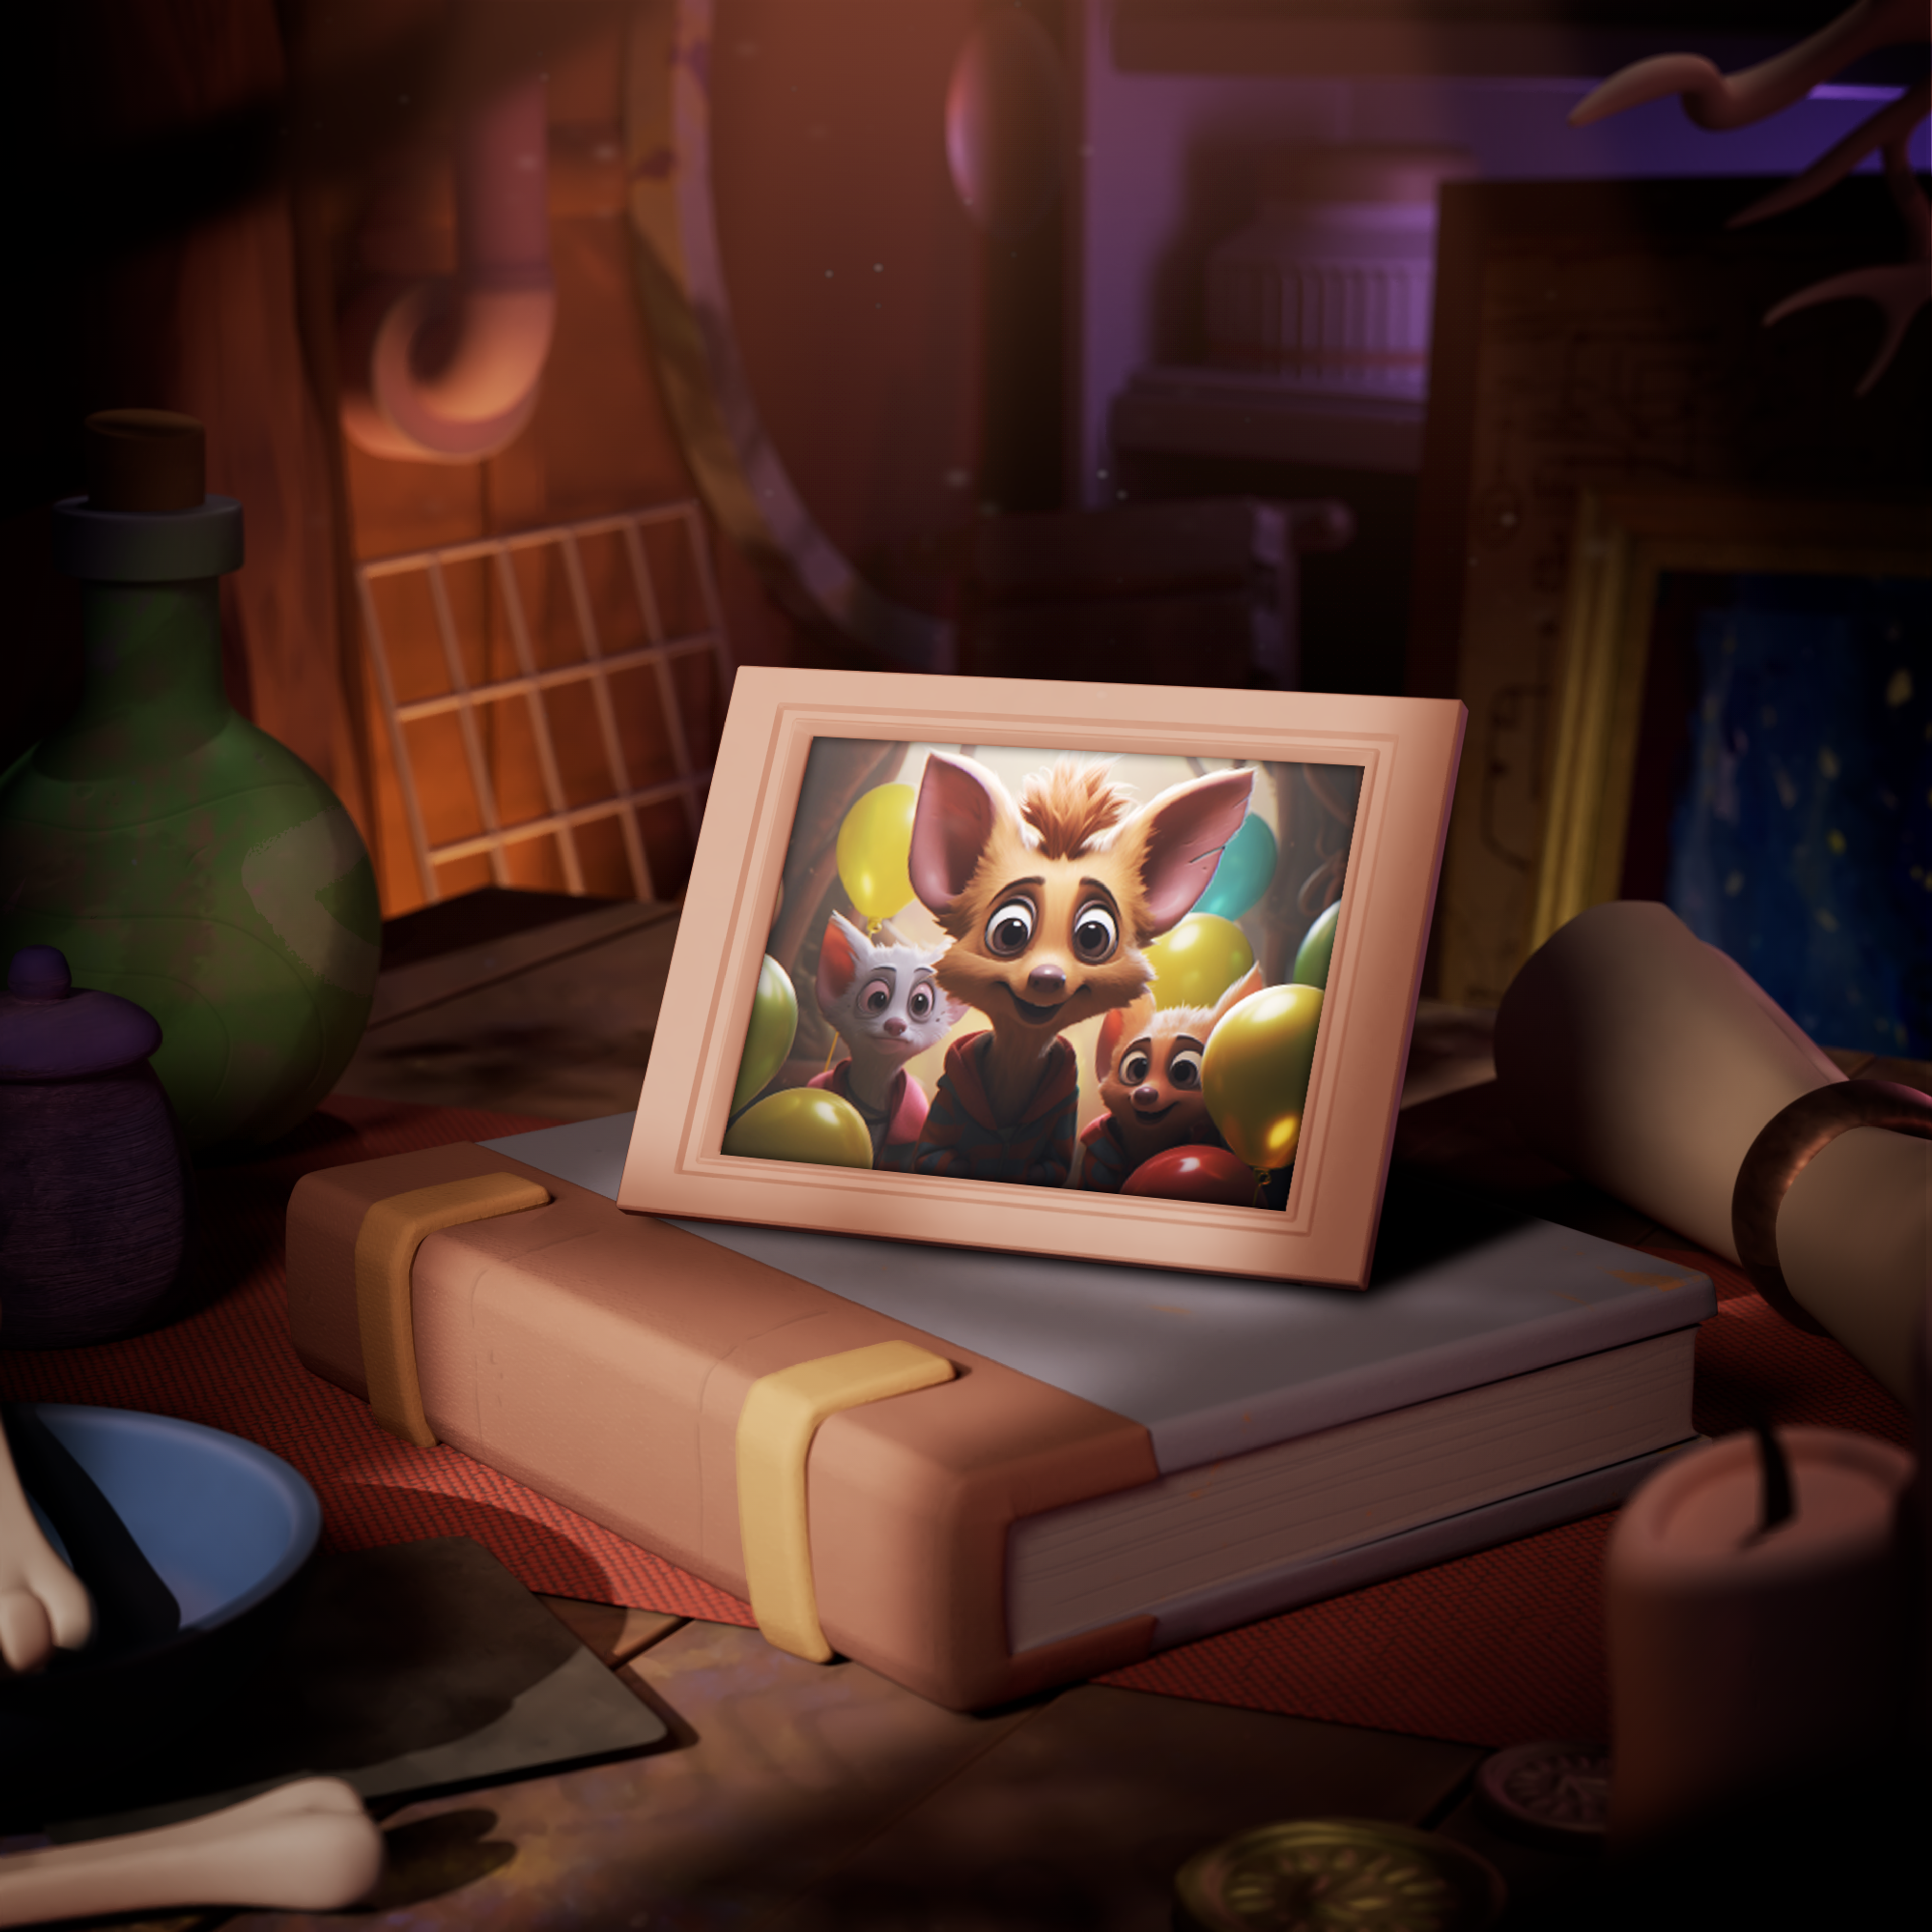 A framed photo of creatures with large ears, like Keepsy.